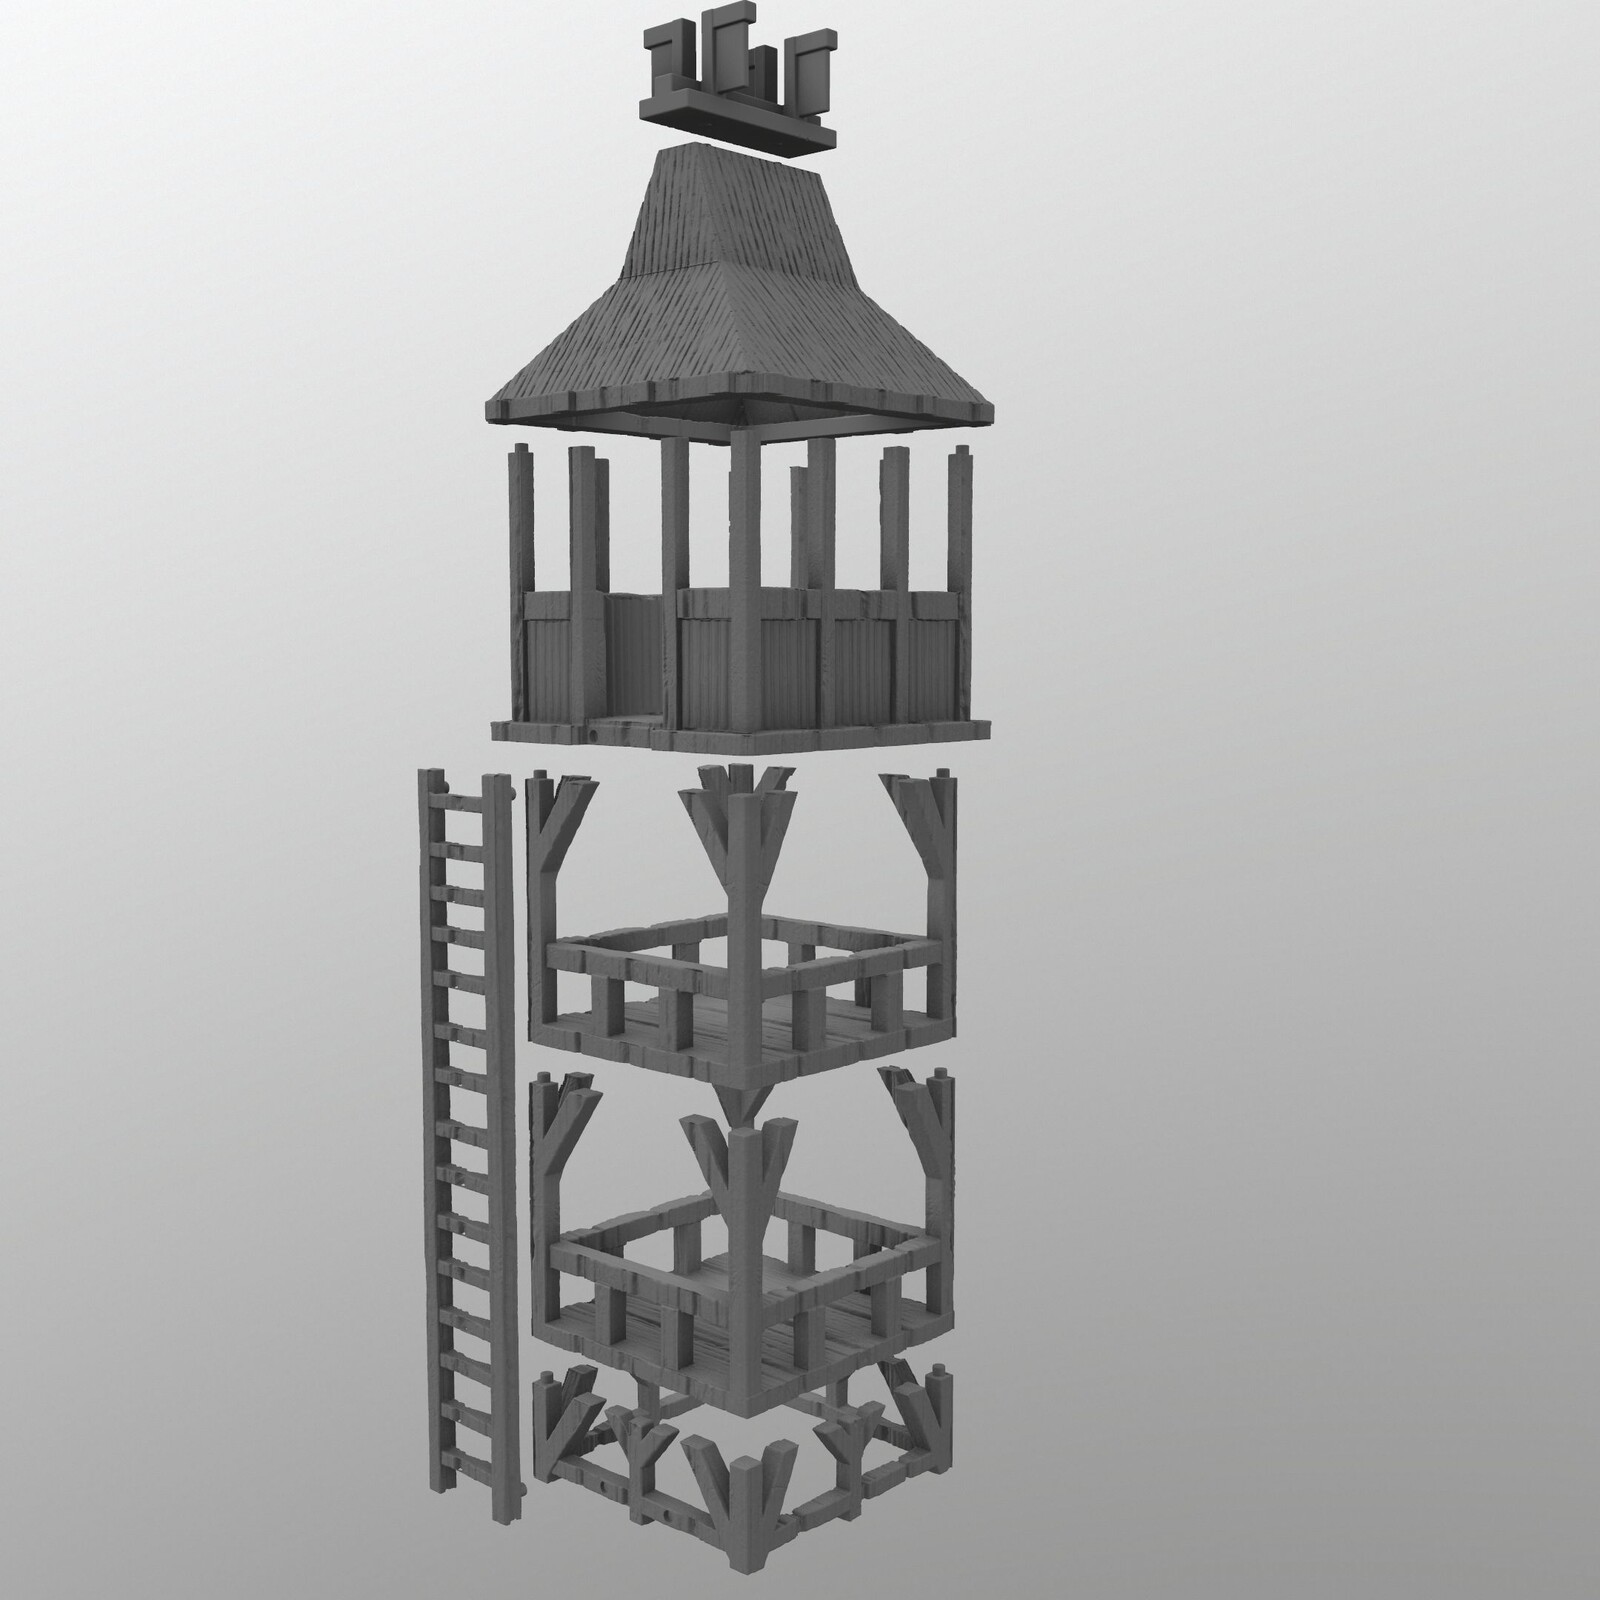 Toolbag render of the various pieces of the guard tower.